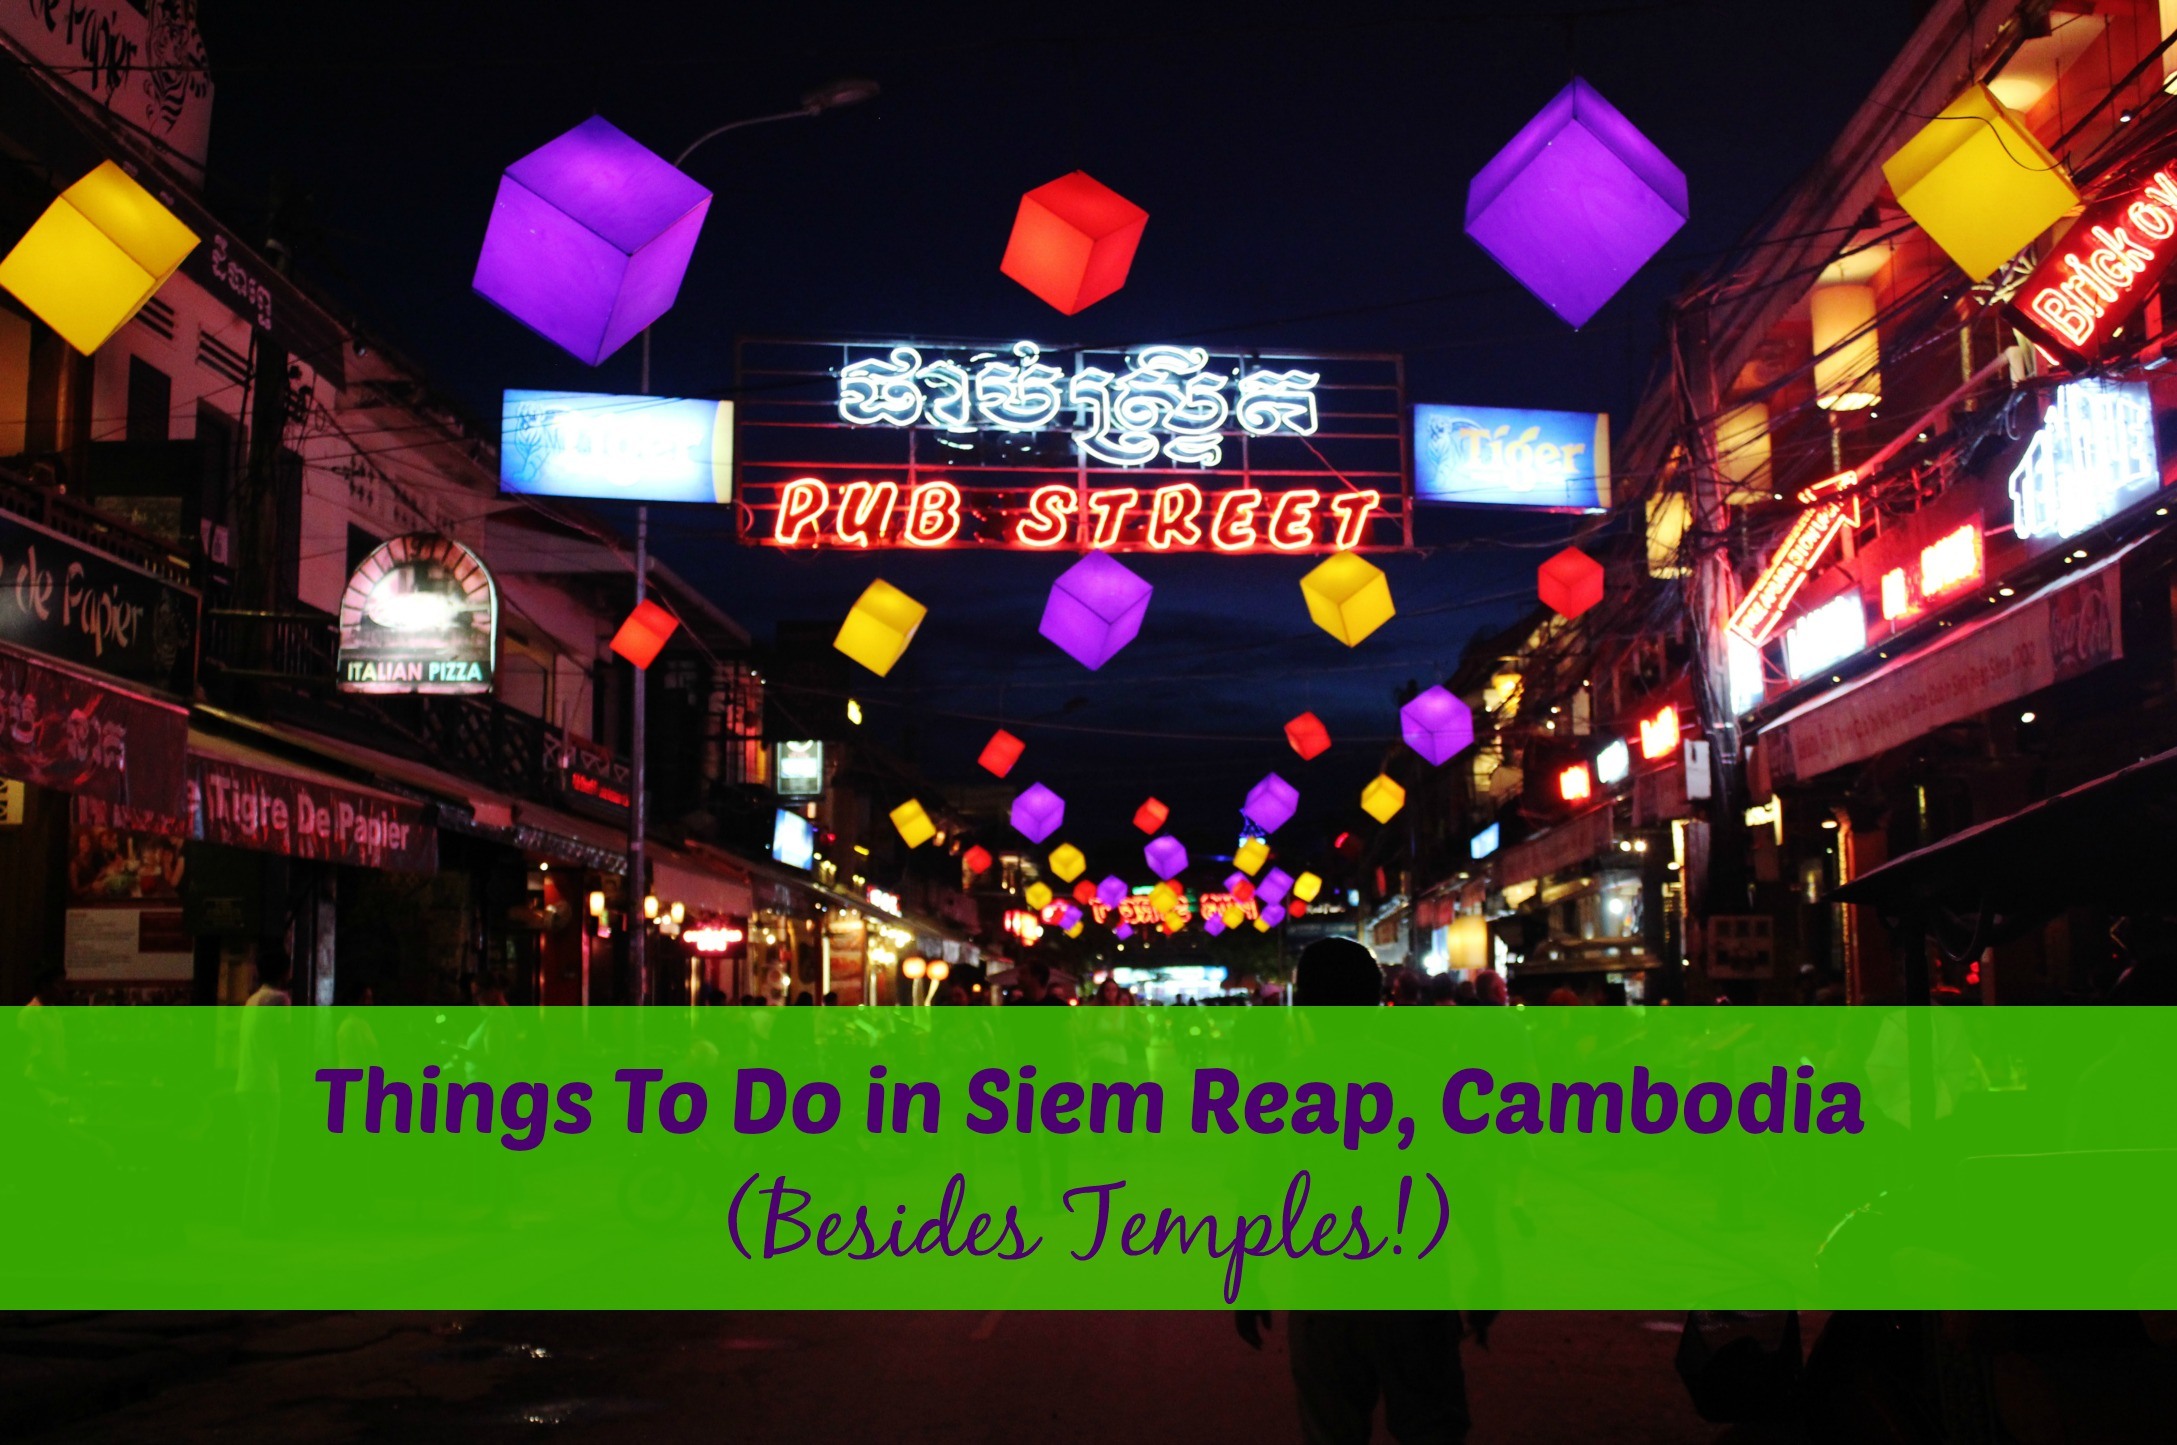 Things To Do in Siem Reap Besides Temples by JetSettingFools.com